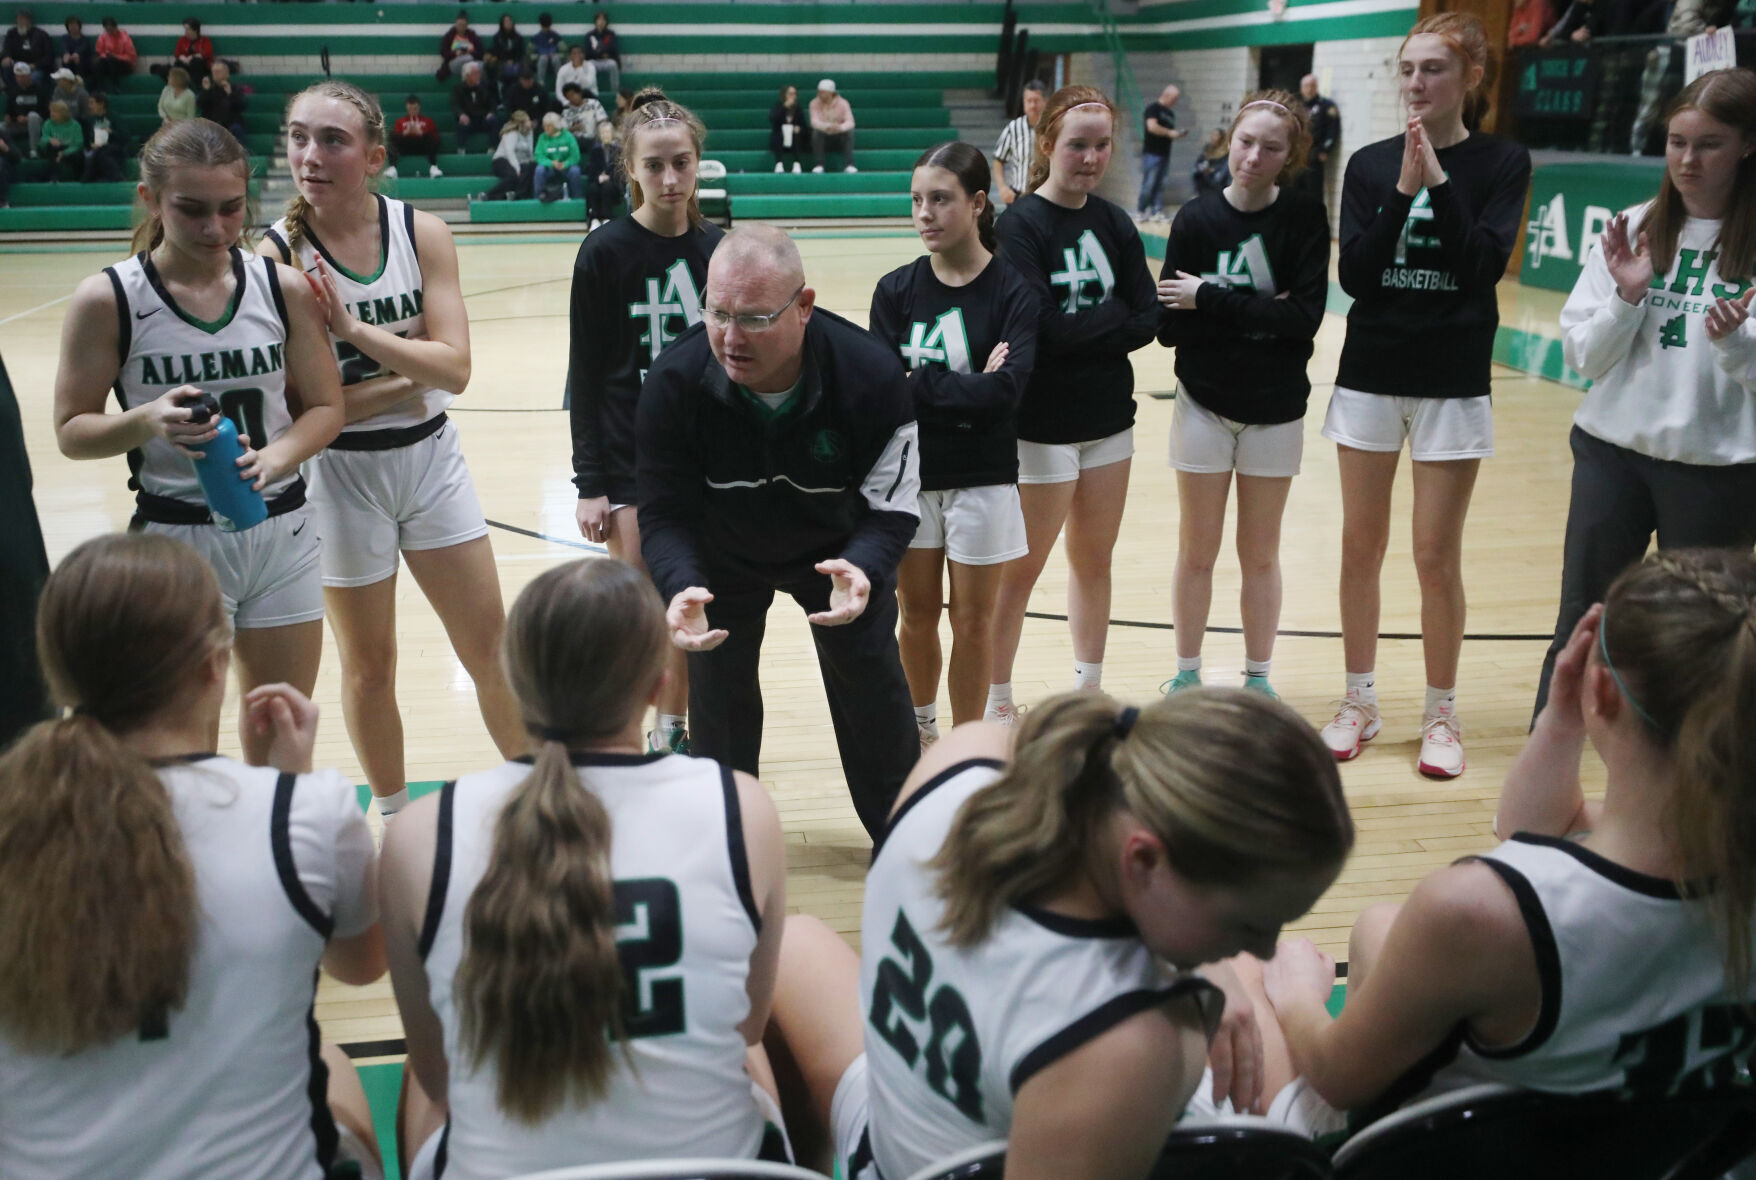 Alleman’s Ford Secures 400th Win Against Former Team: Pioneers Triumph with Tremendous Second Half Performance